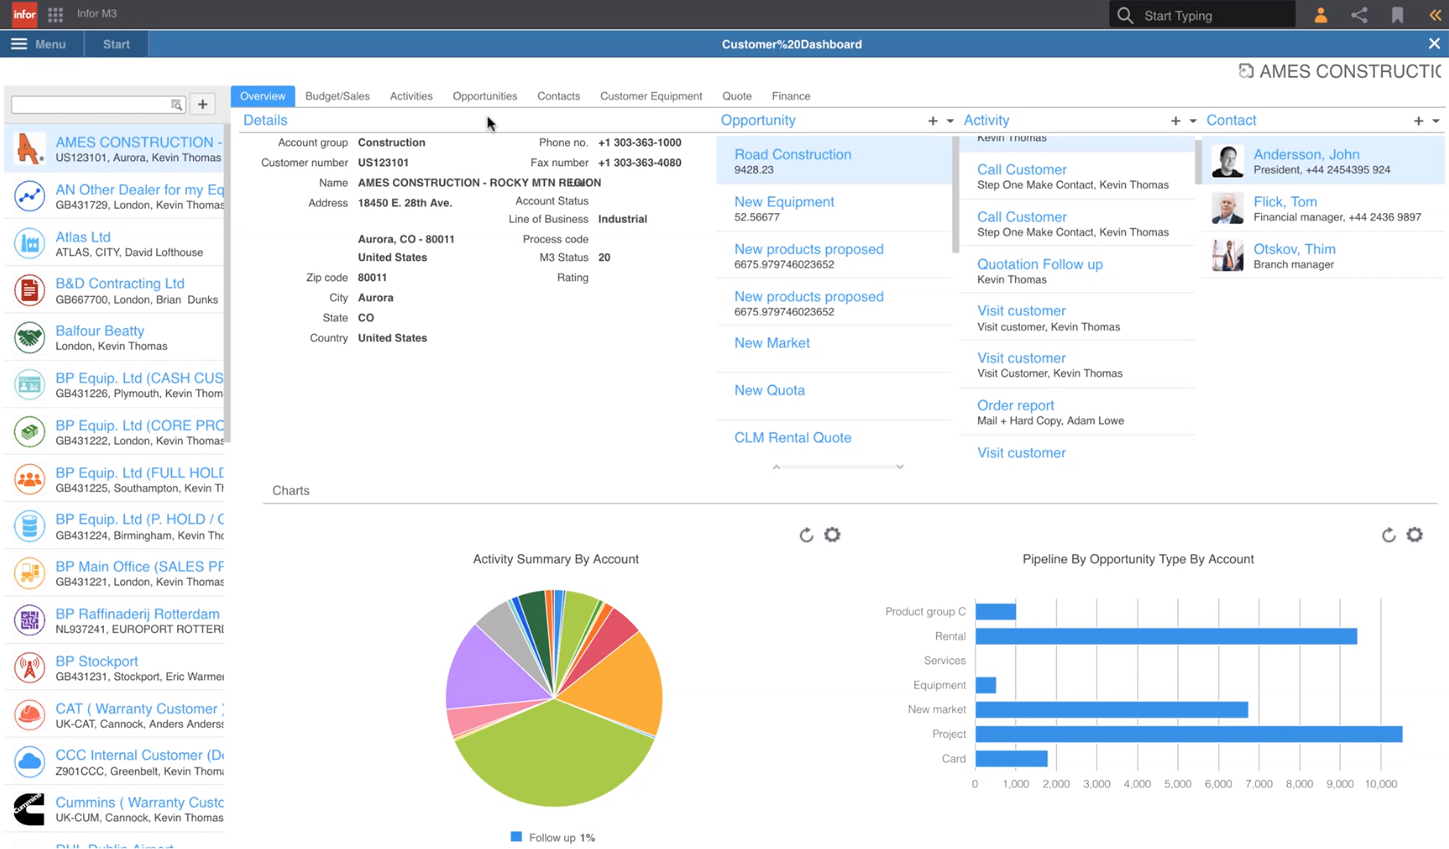 Infor M3 Software - Infor M3 CRM dashboard